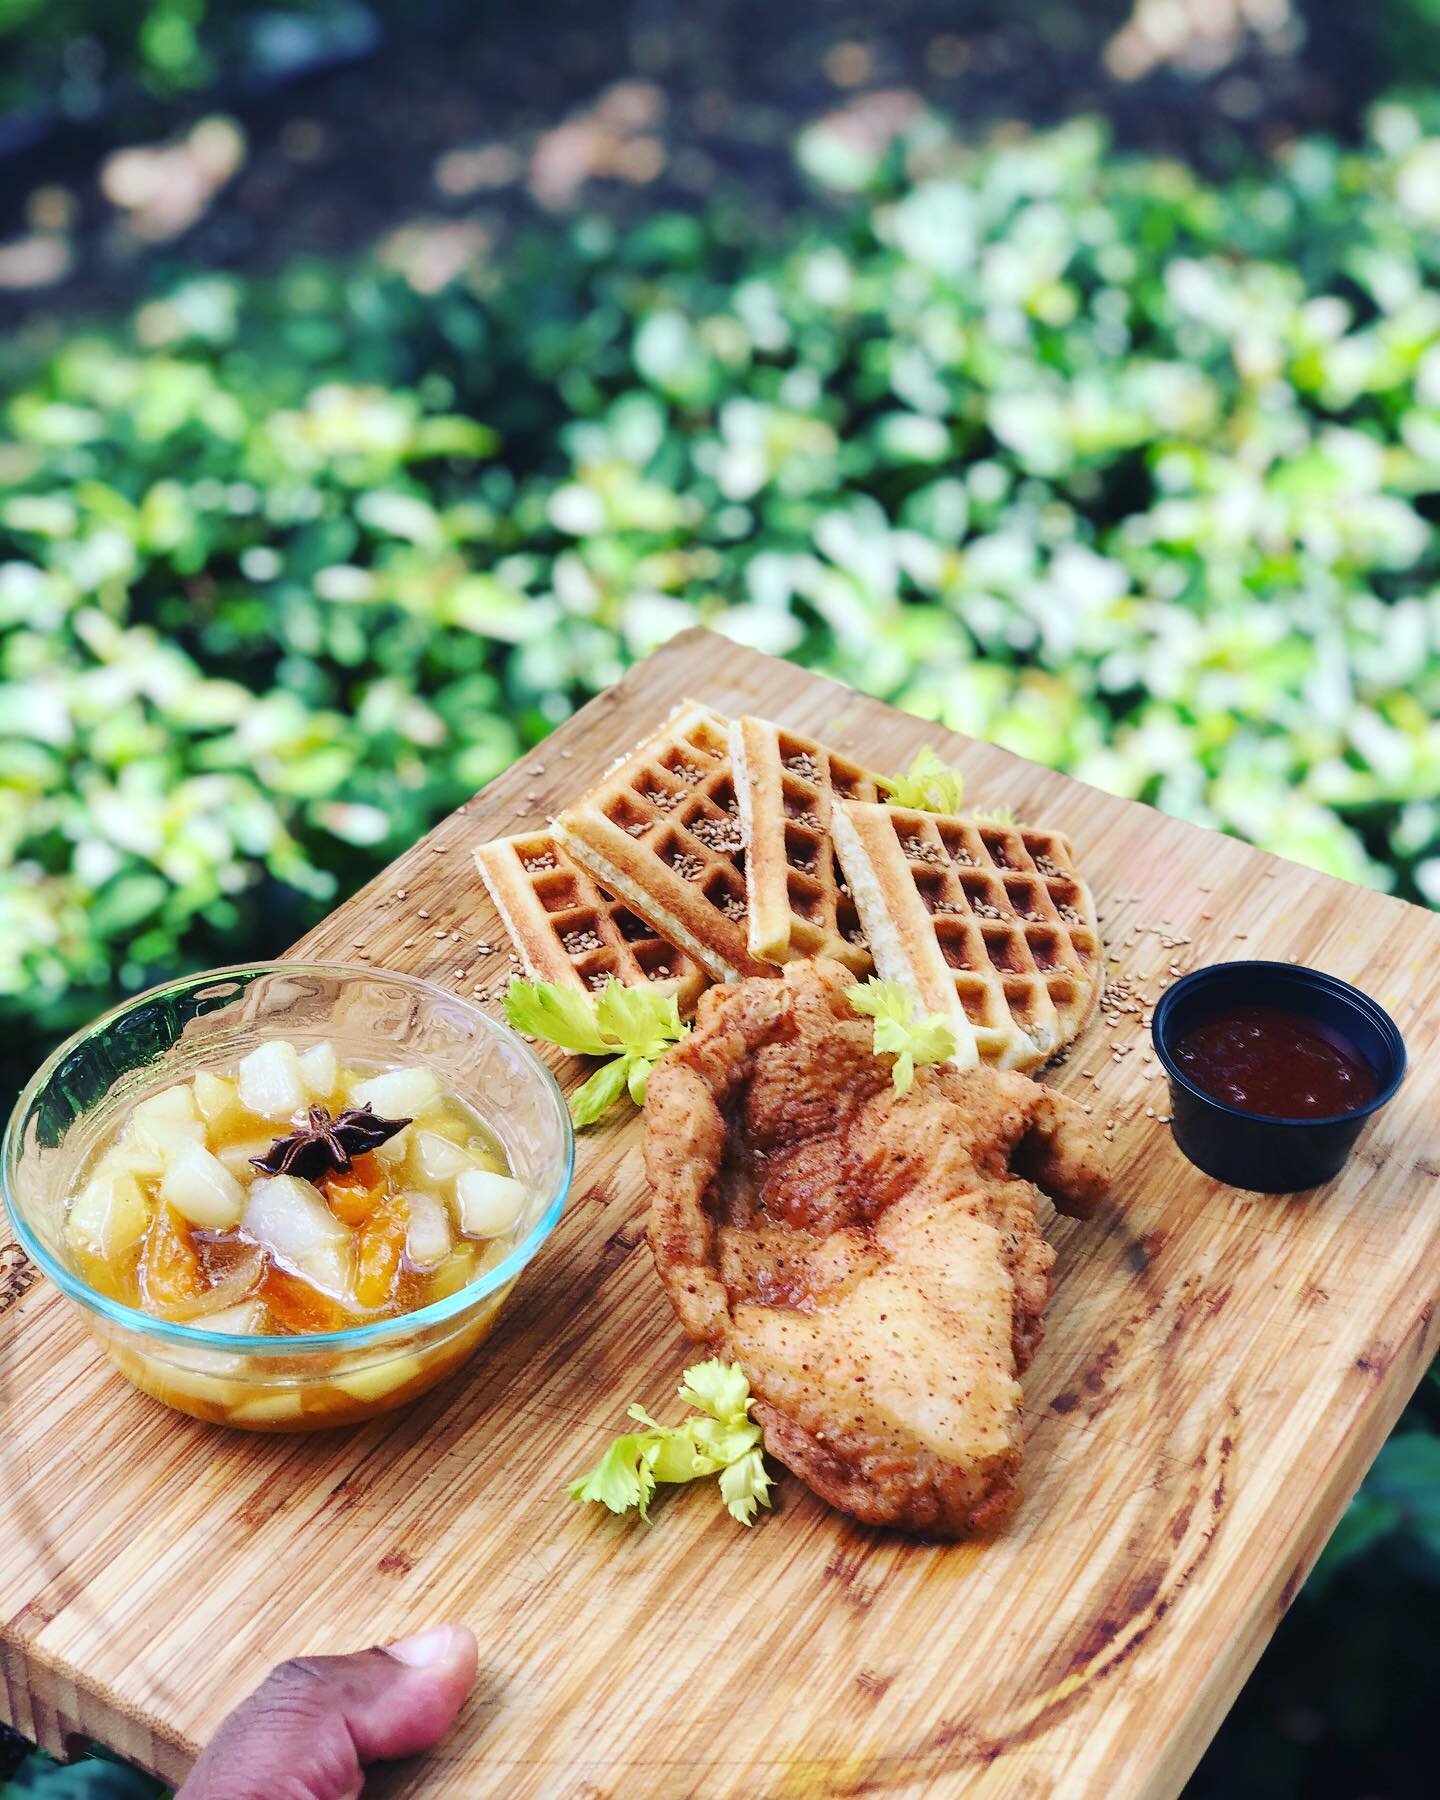 Thursday Meal...

Korean Fried Chicken &amp; Waffles....Benne Seed Rice Flour Waffle, Pear Apricot Compote scented with Star Anise and Crystallized Ginger, Gochujang Honey Sauce on the side $13 each 

Chef Kenny&rsquo;s Private Chef Services

Mission